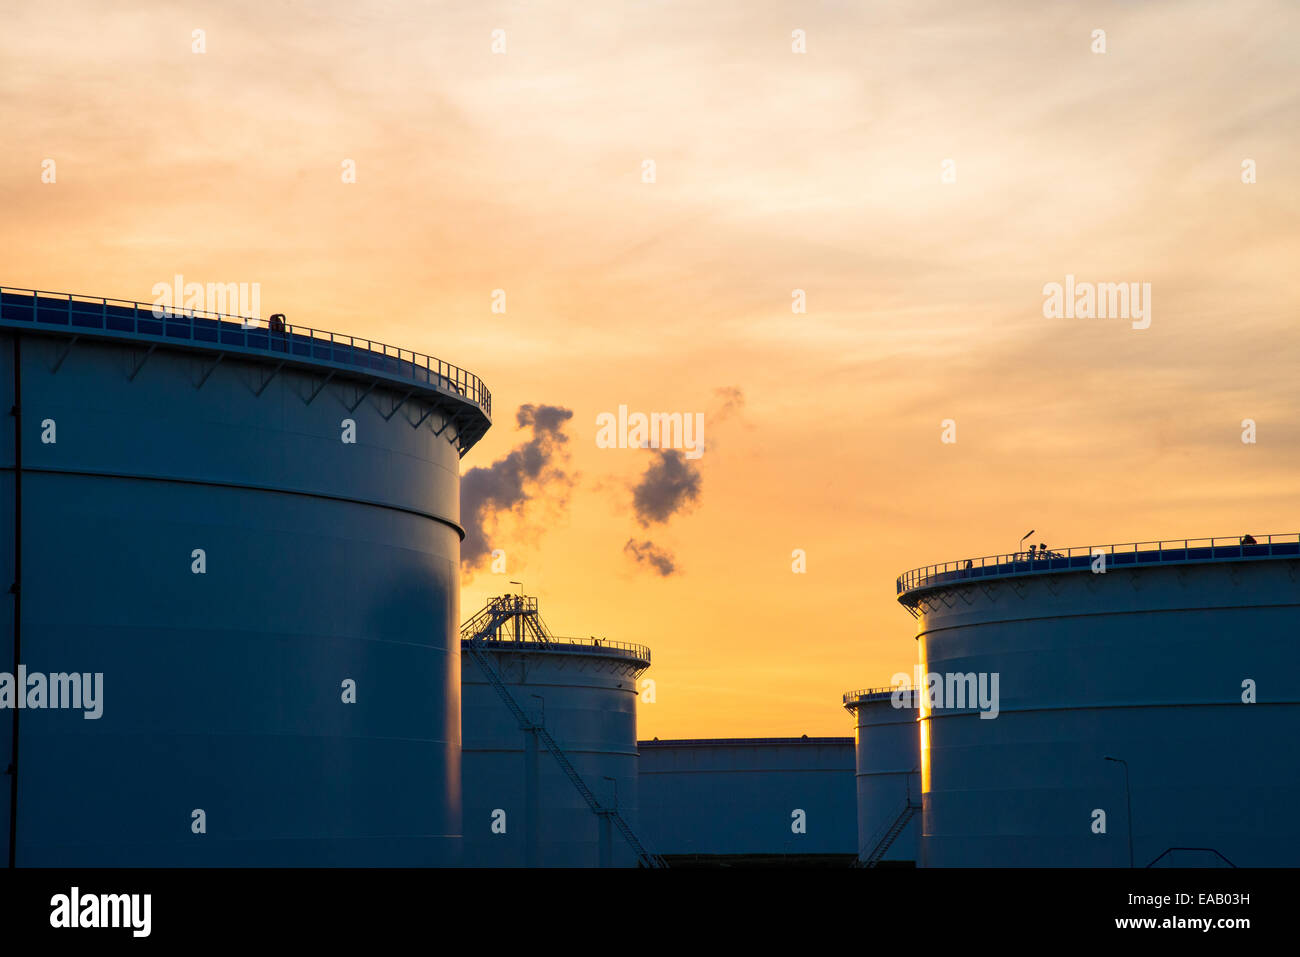 storage tanks for oil in harbour of rotterdam holland Stock Photo